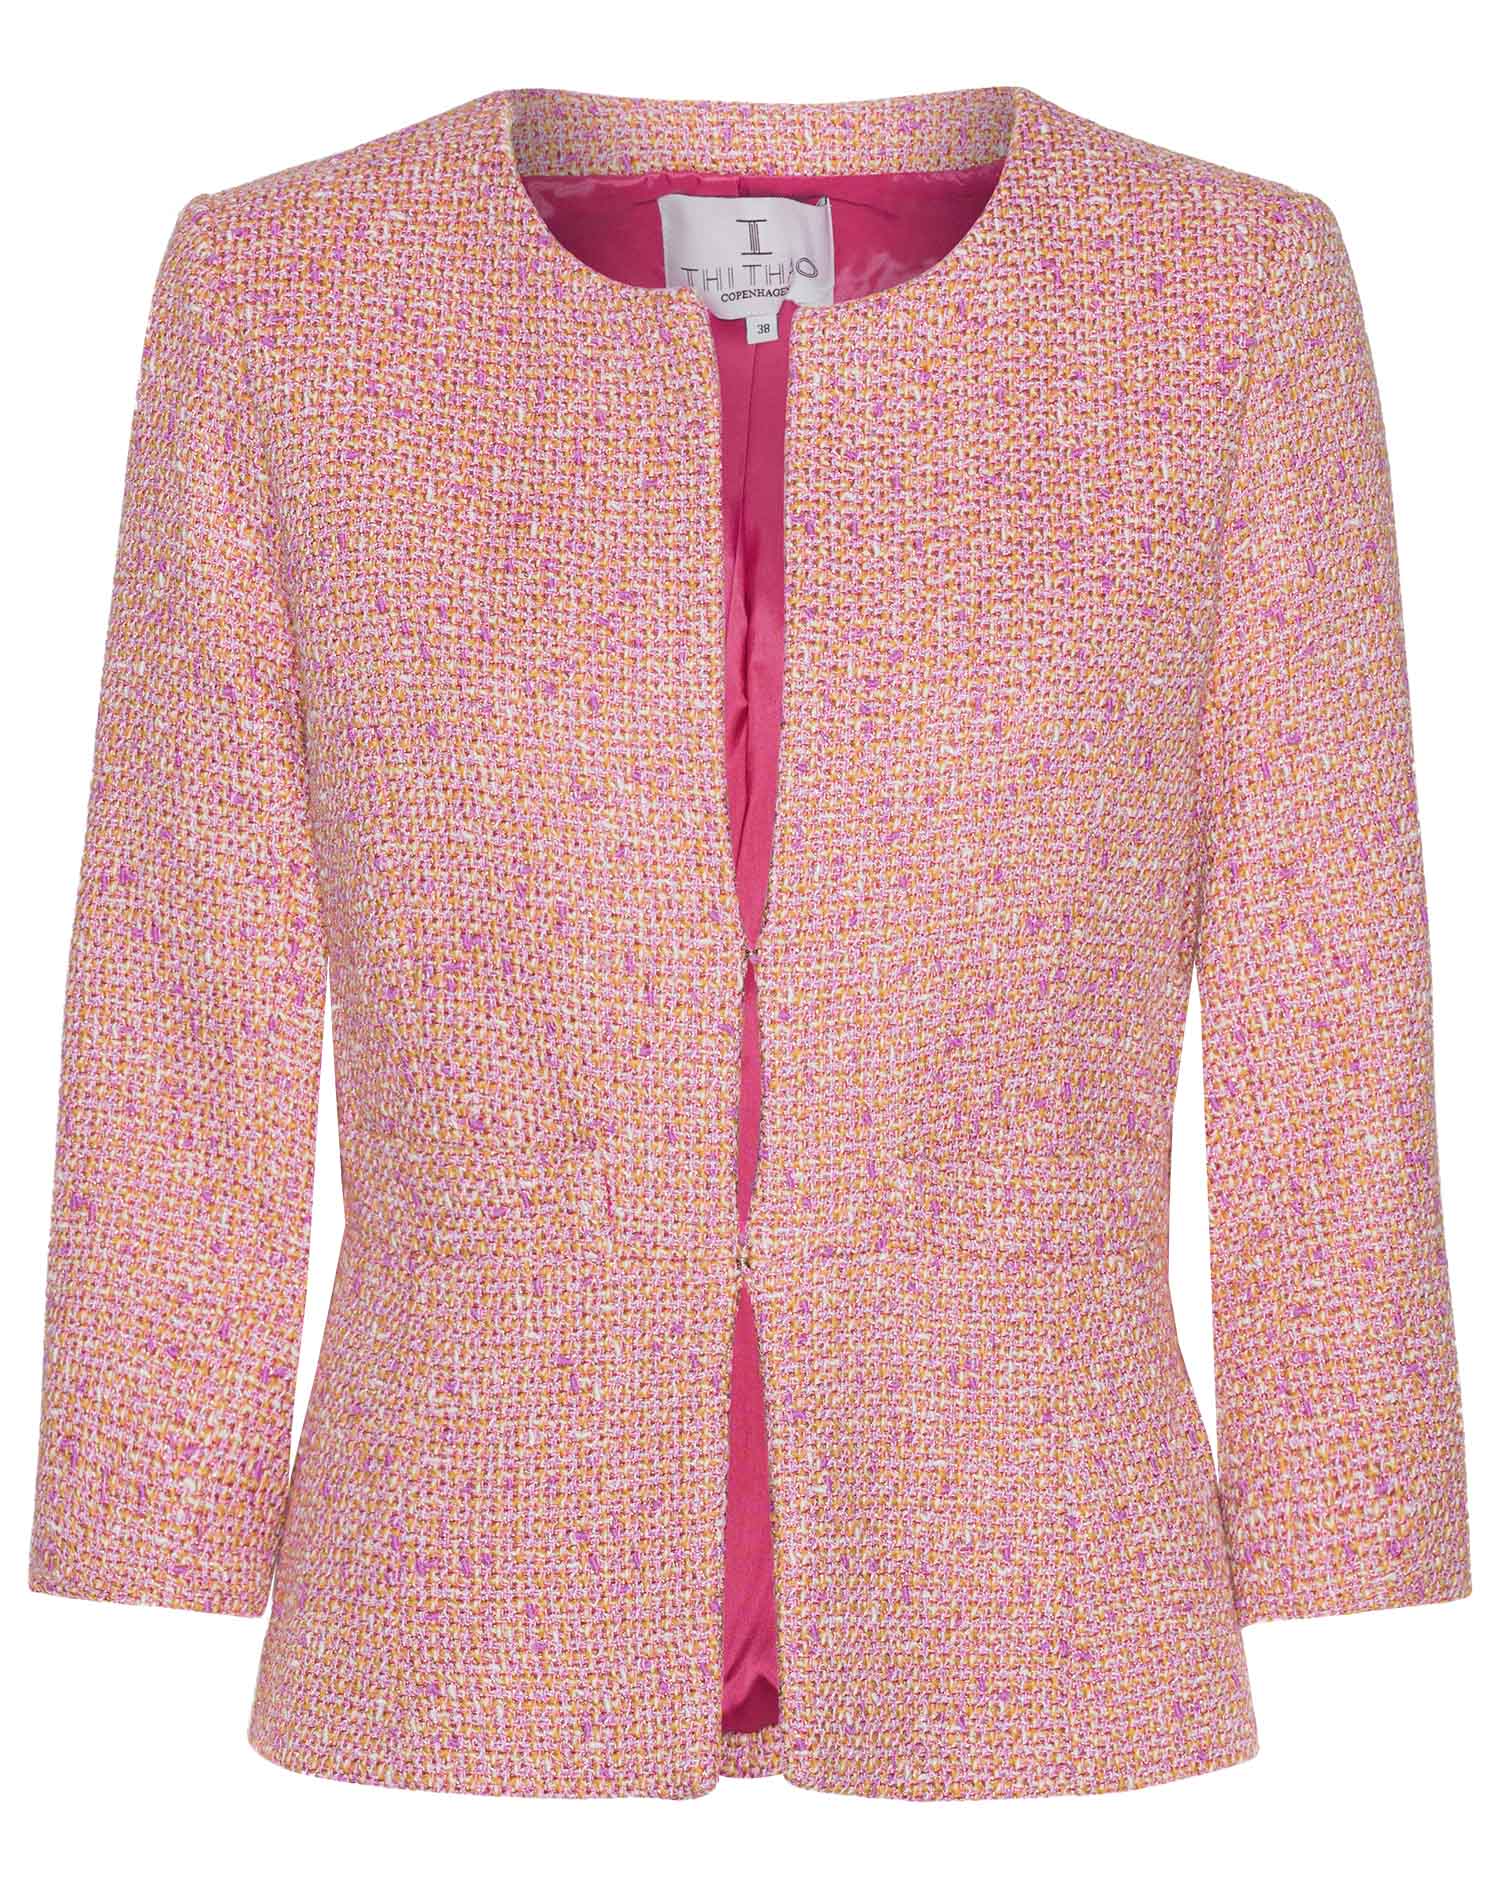 Unika jacket in pink and yellow tweed by Thi Thao Copenhagen